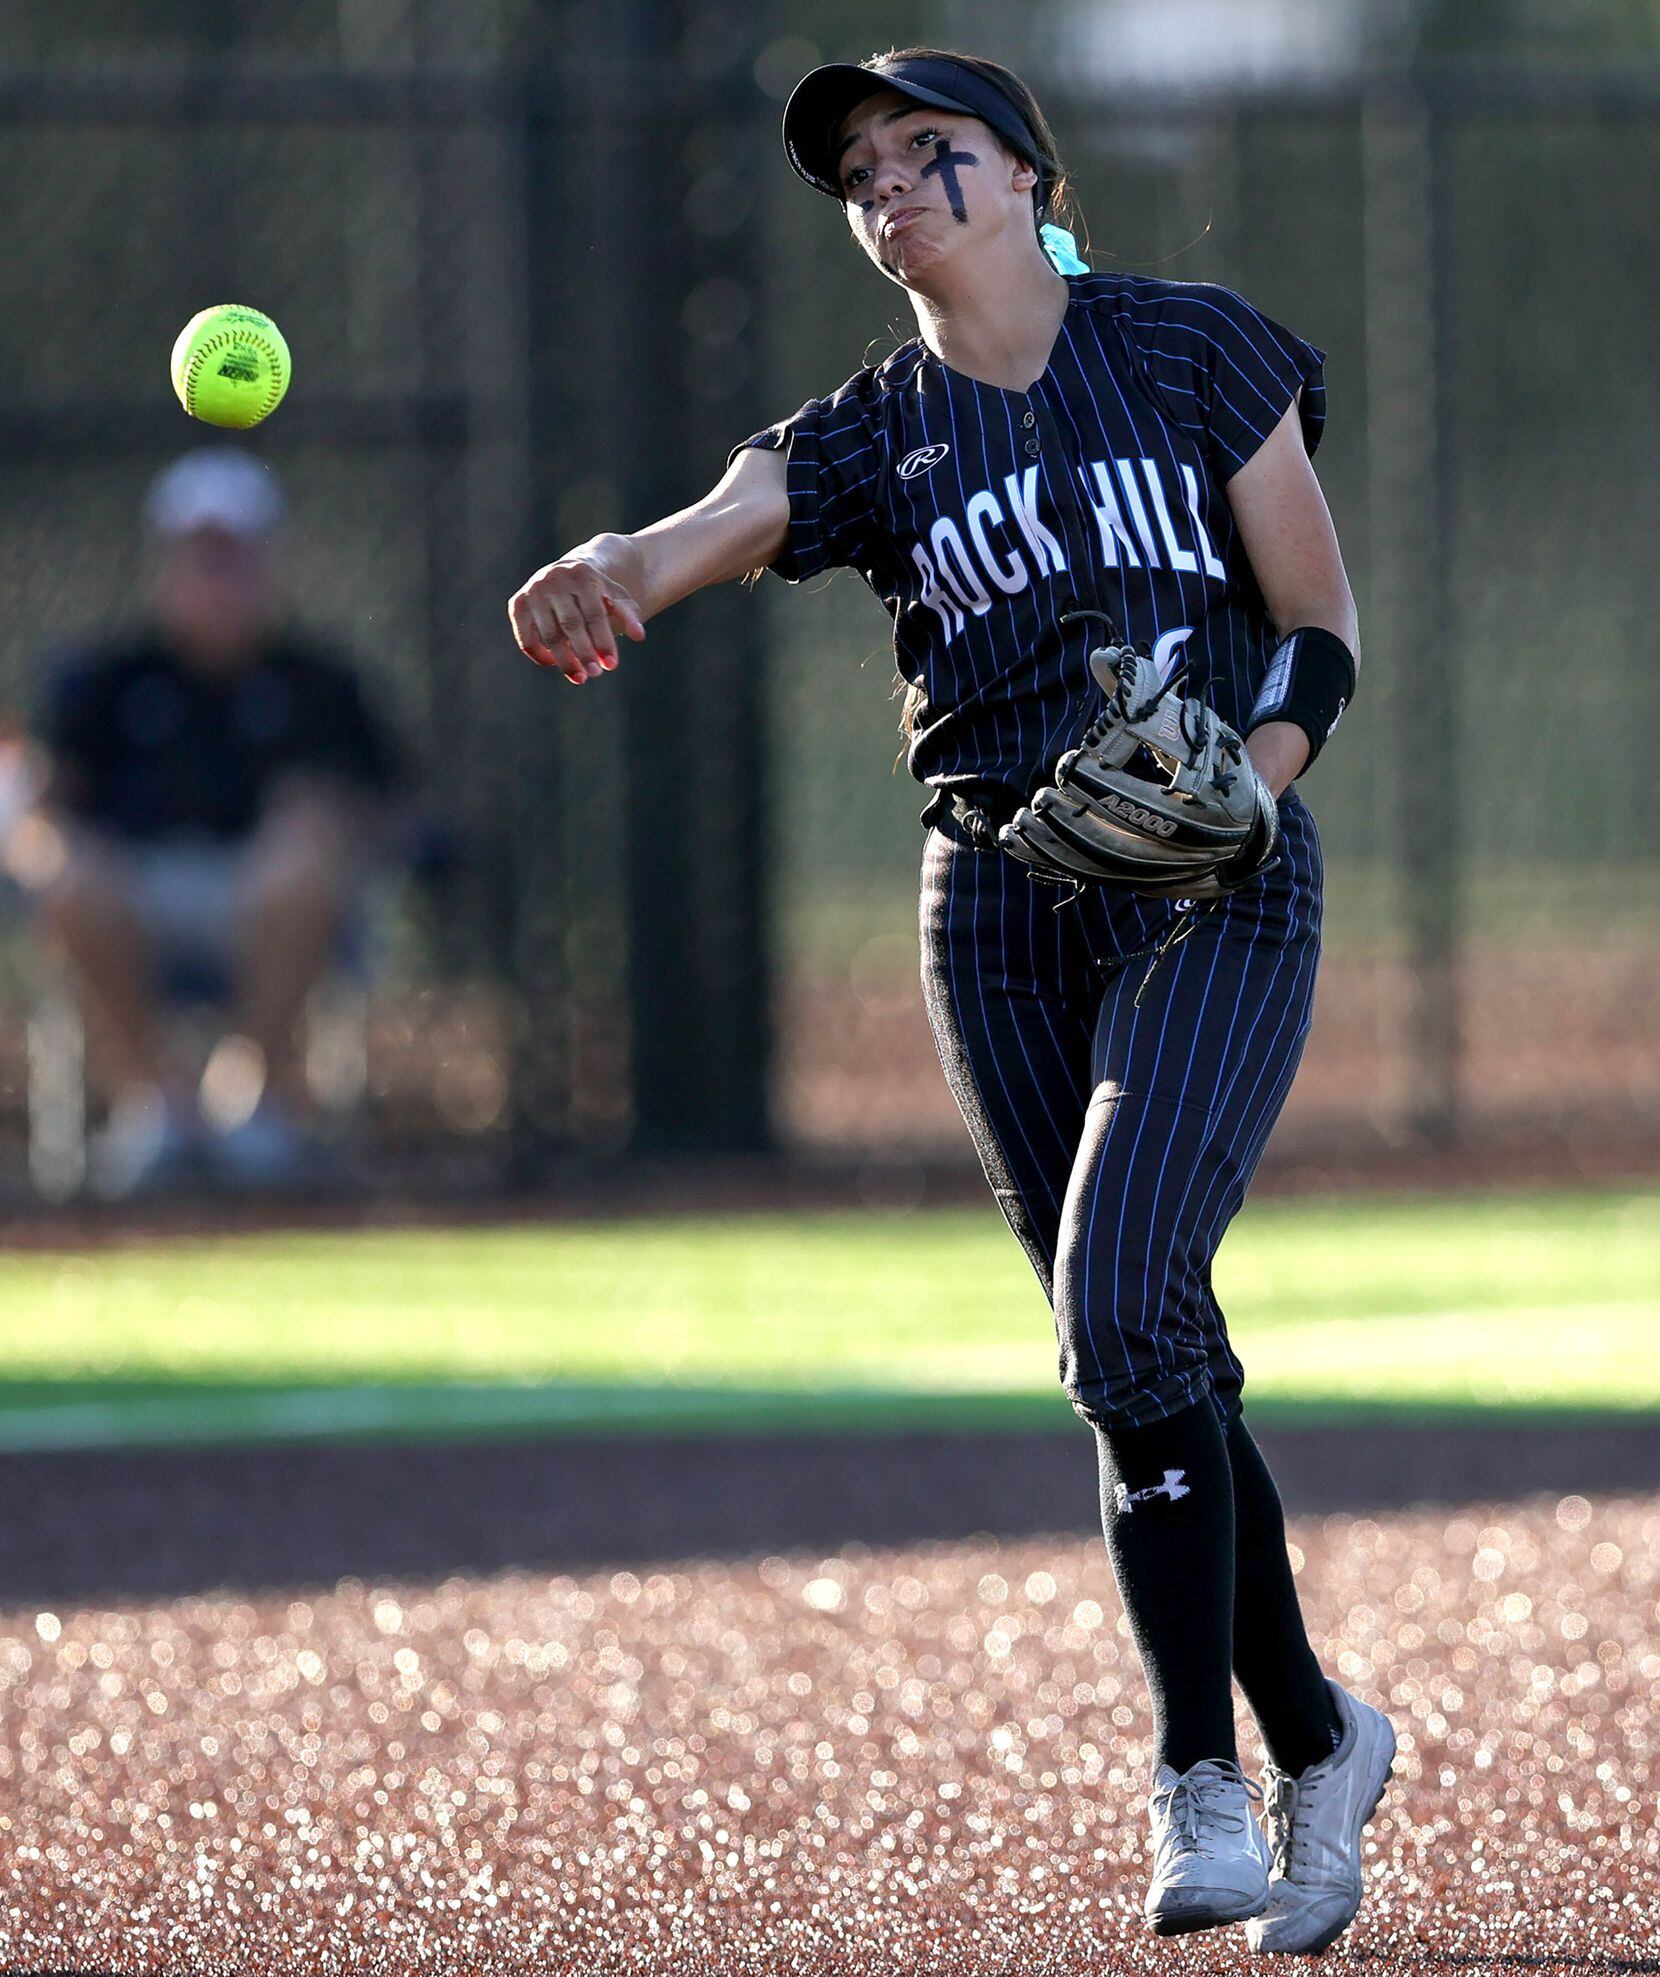 Prosper Rock Hill shortstop Camila Spriggs makes a throw over to first base against Royce...